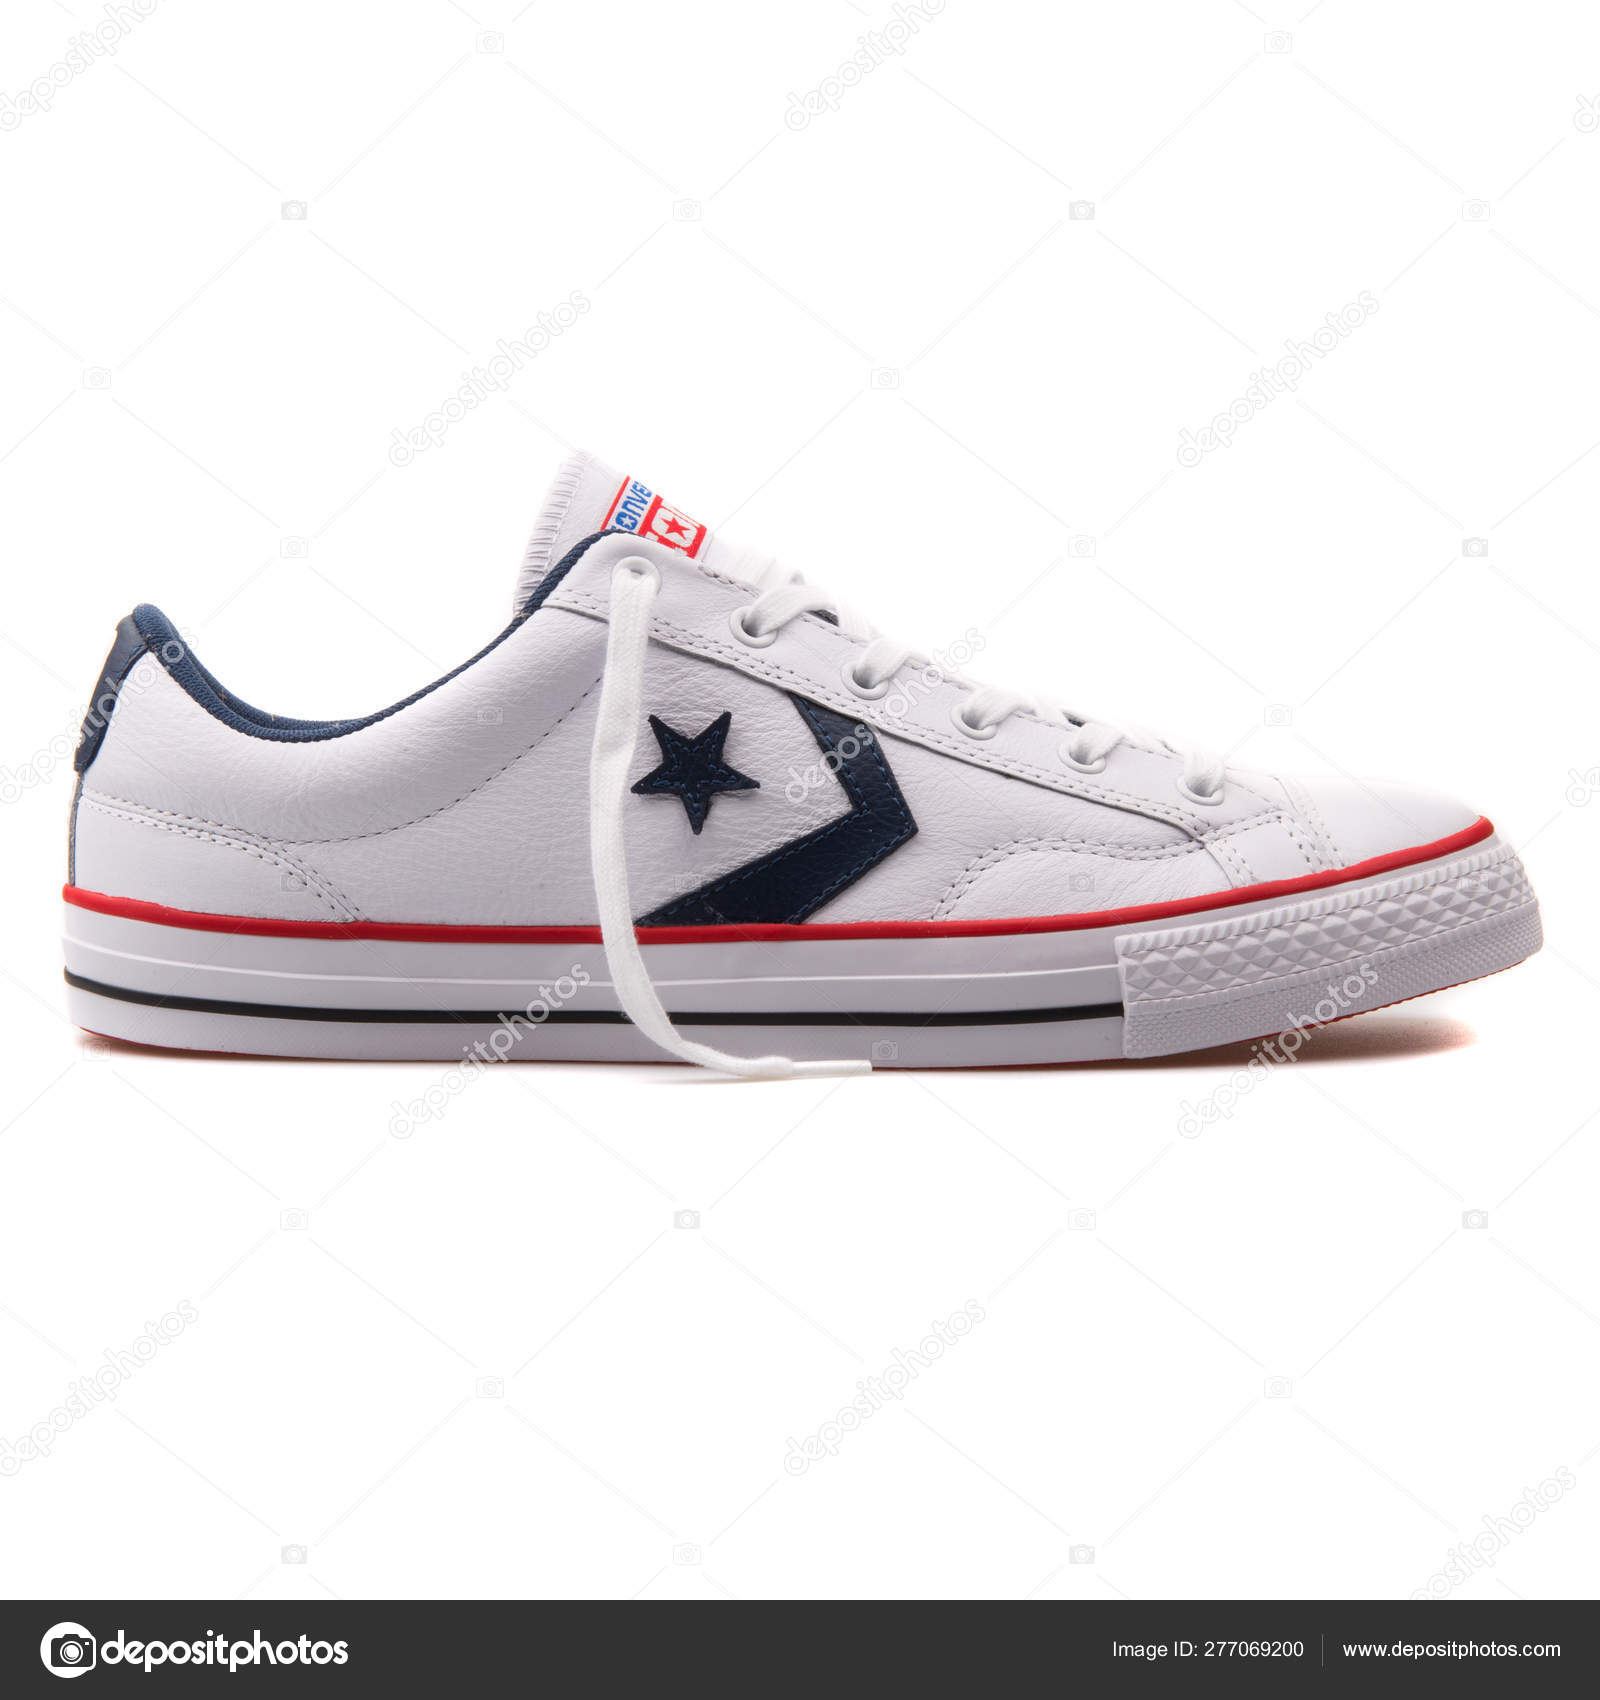 converse navy and white star player